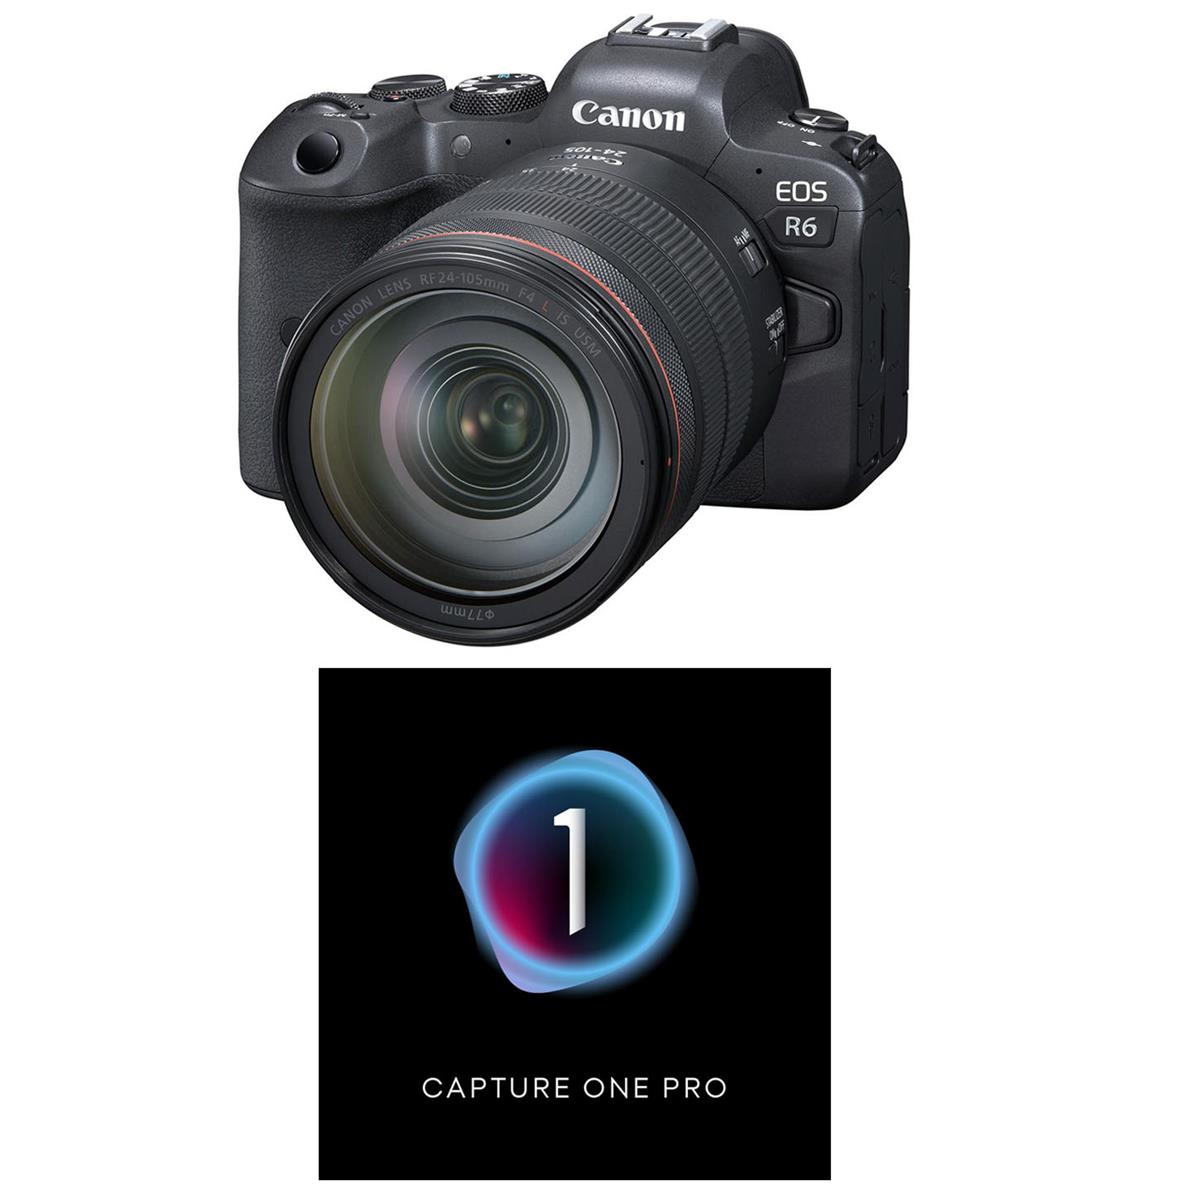 Image of Canon EOS R6 Mirrorless Camera with RF 24-105mm f/4 L IS USM Lens with Capture One